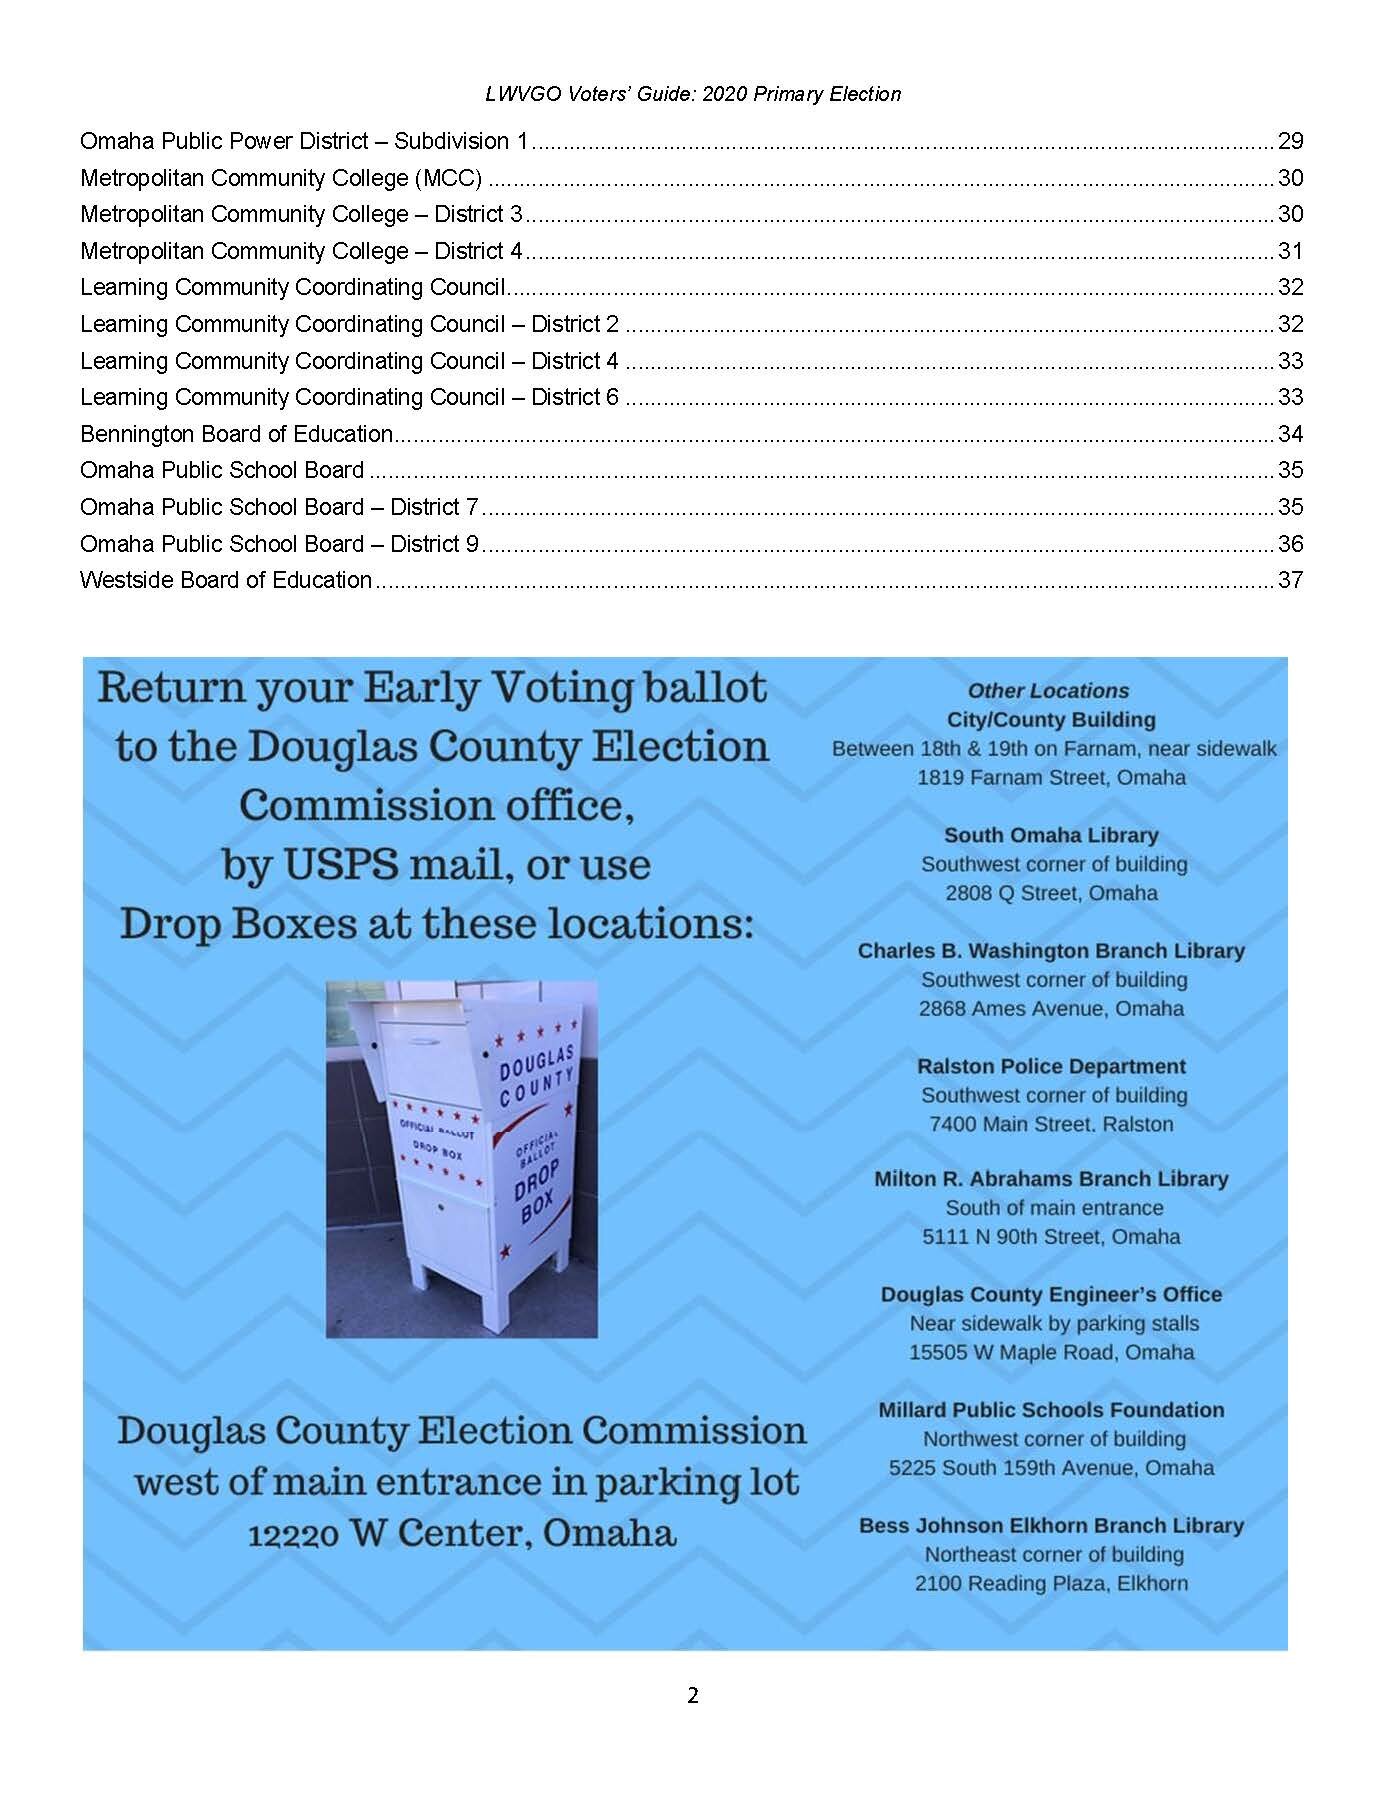 2020-Primary-Voters-Guide-LWVGO_0_Page_02.jpg